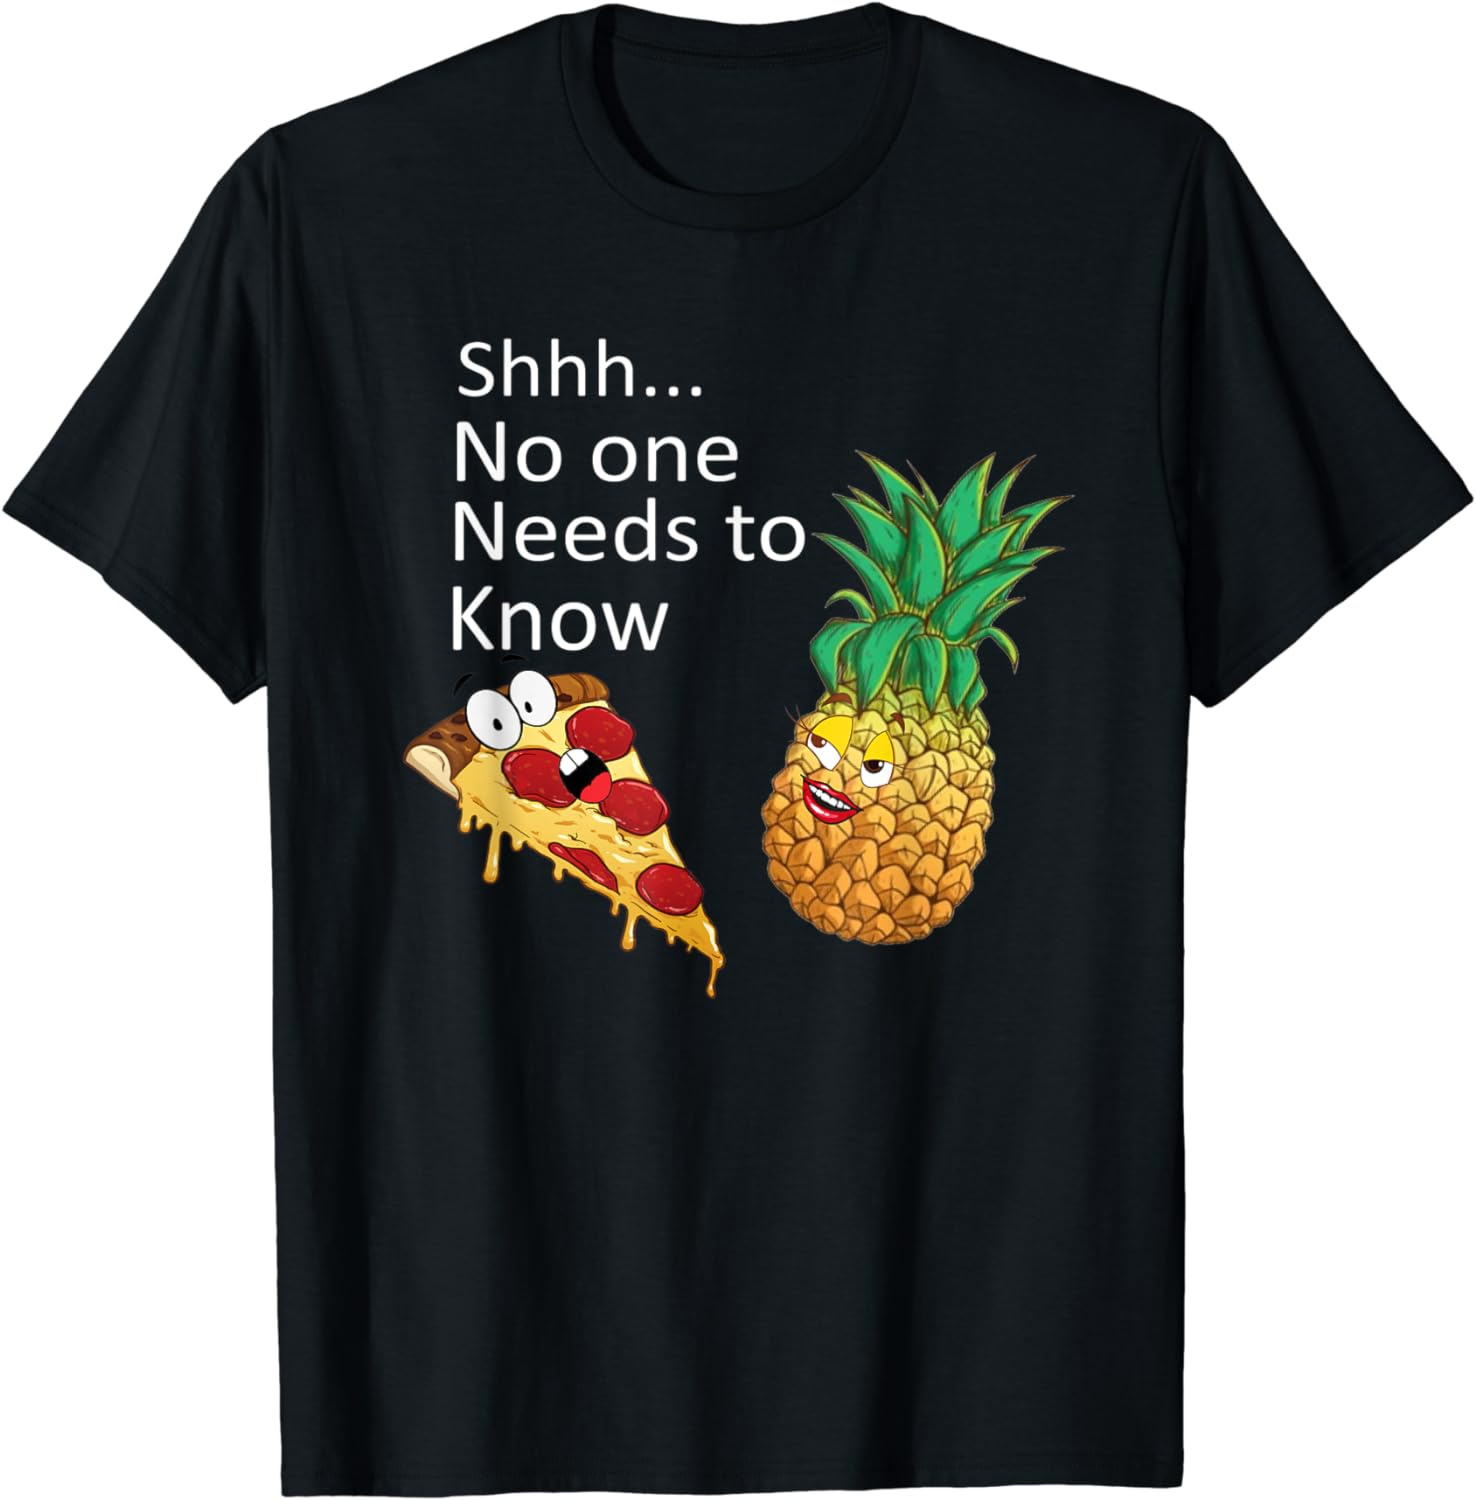 Amazon.com: Shhh No One Needs To Know Pineapple on Pizza T-Shirt: Clothing